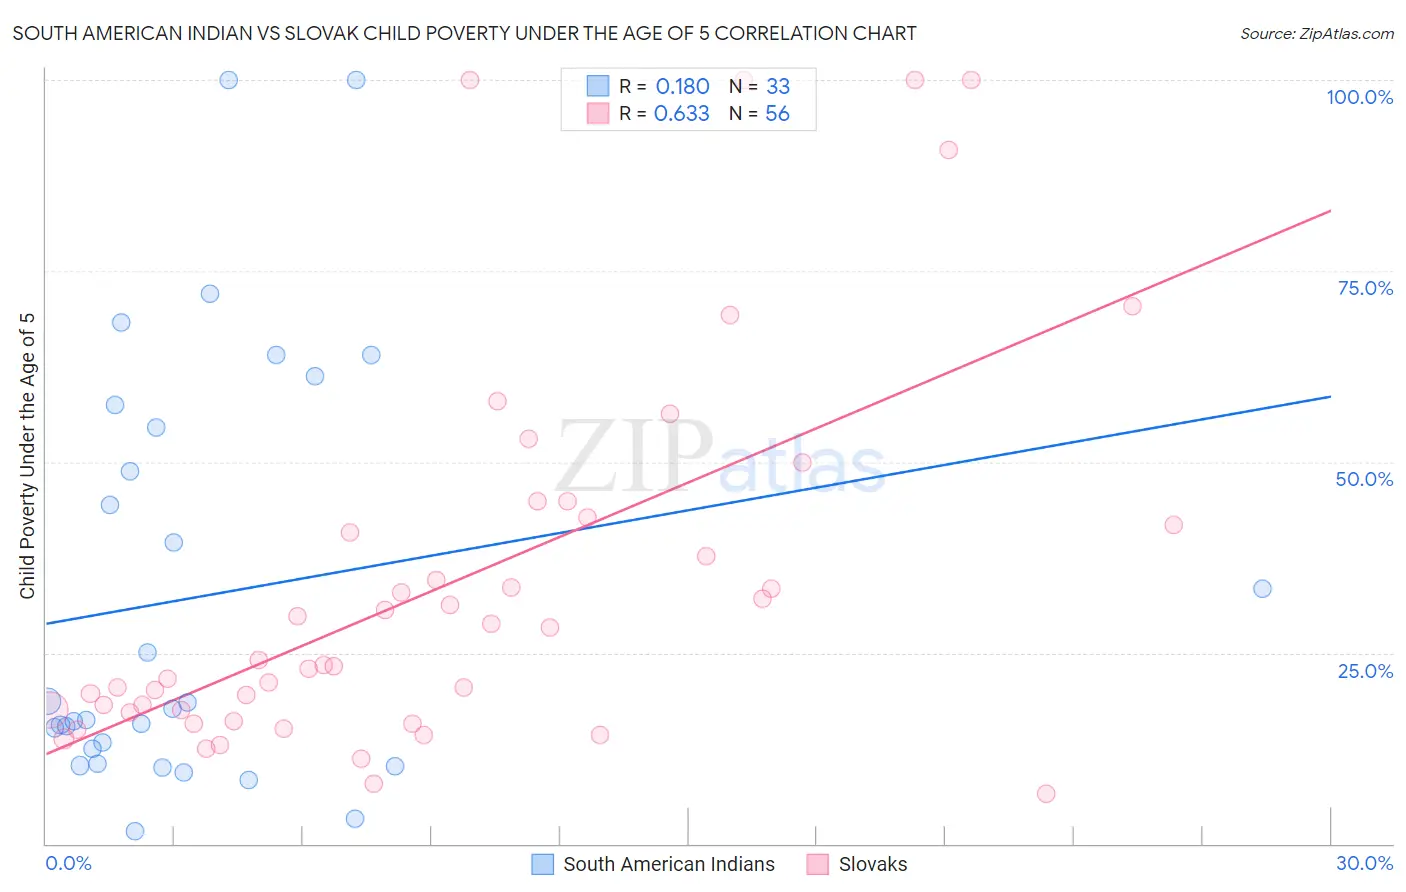 South American Indian vs Slovak Child Poverty Under the Age of 5